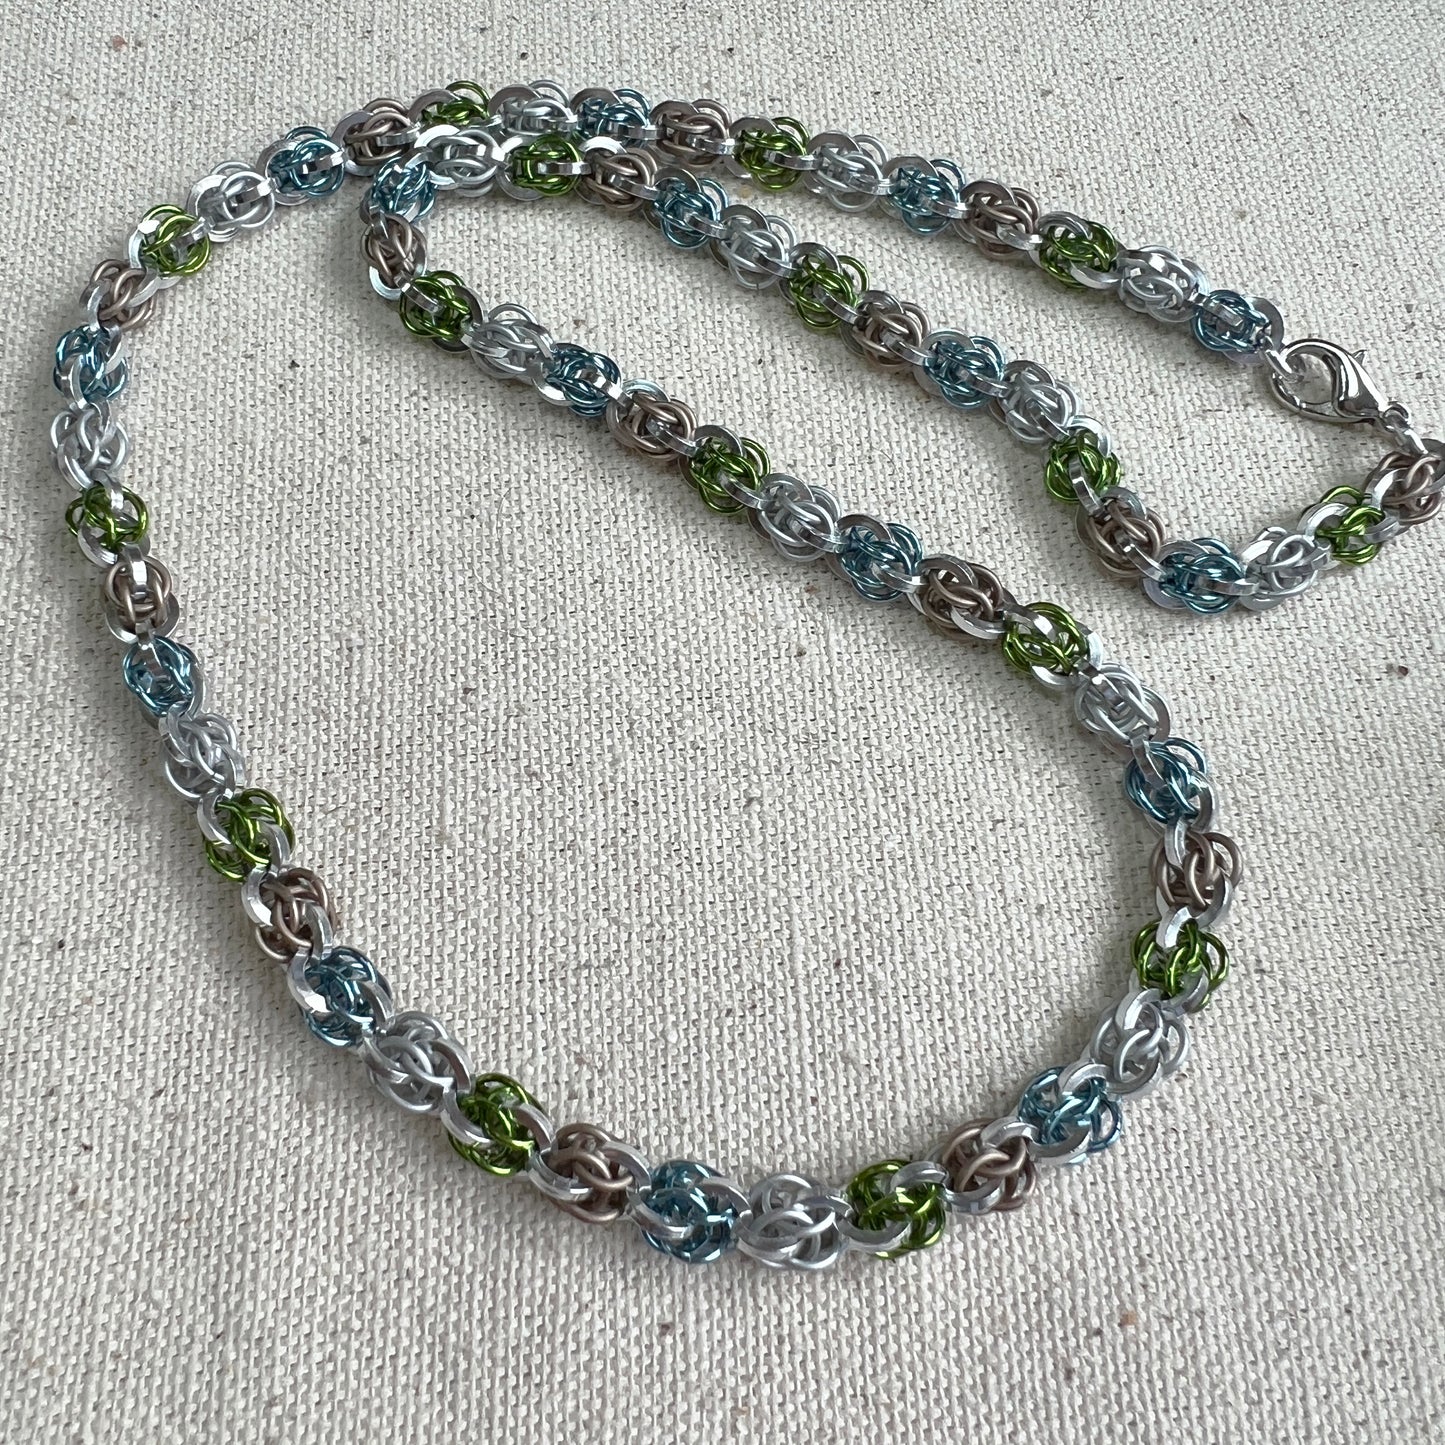 Sweet Pea Sparkle Necklace kit with FREE video - Silver Mt Champagne Lime Frost and Sky Blue